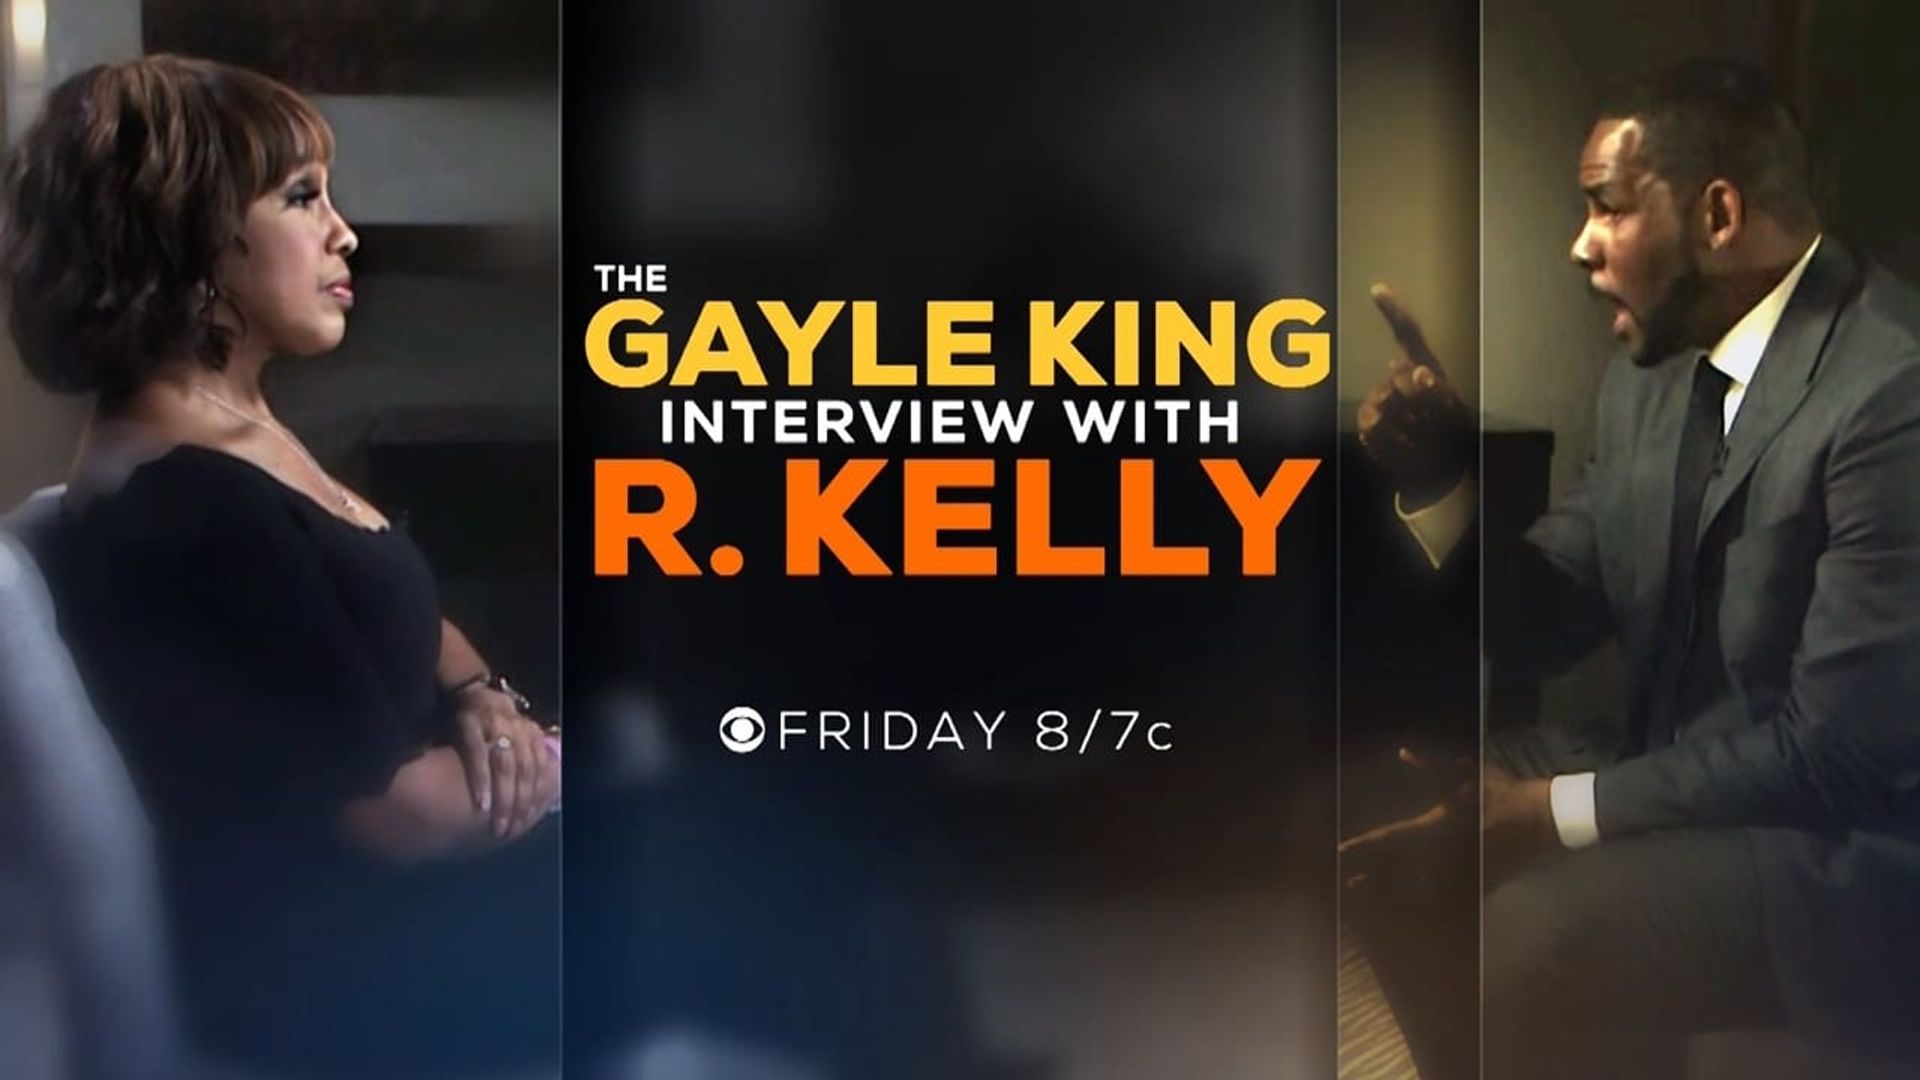 The Gayle King Interview with R. Kelly background